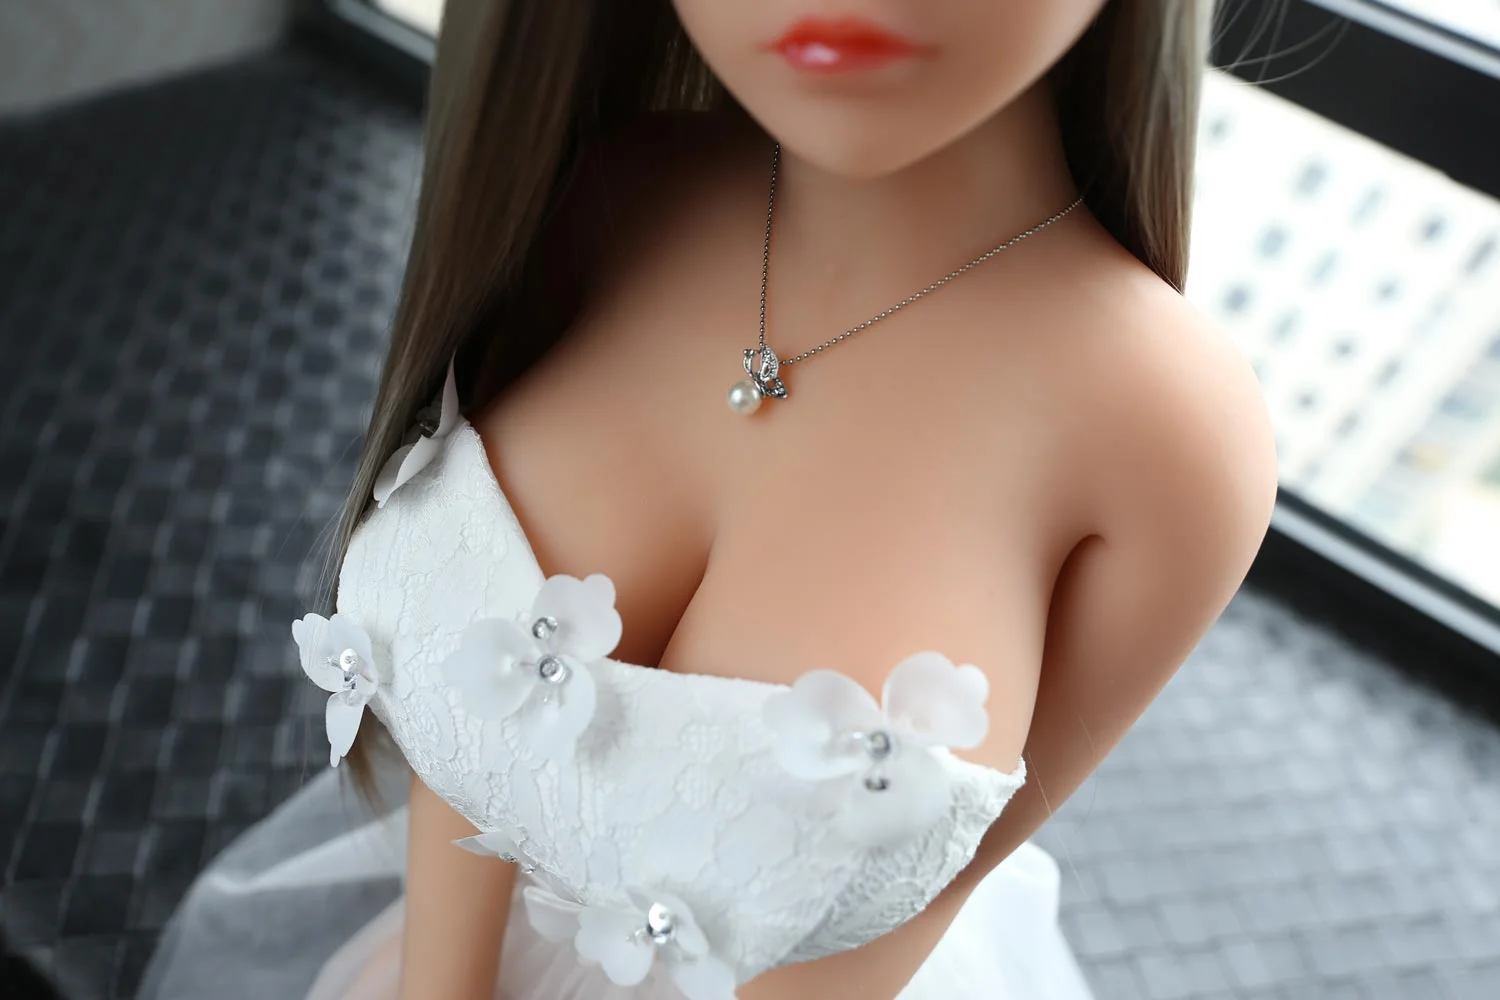 Mini sex doll with necklace